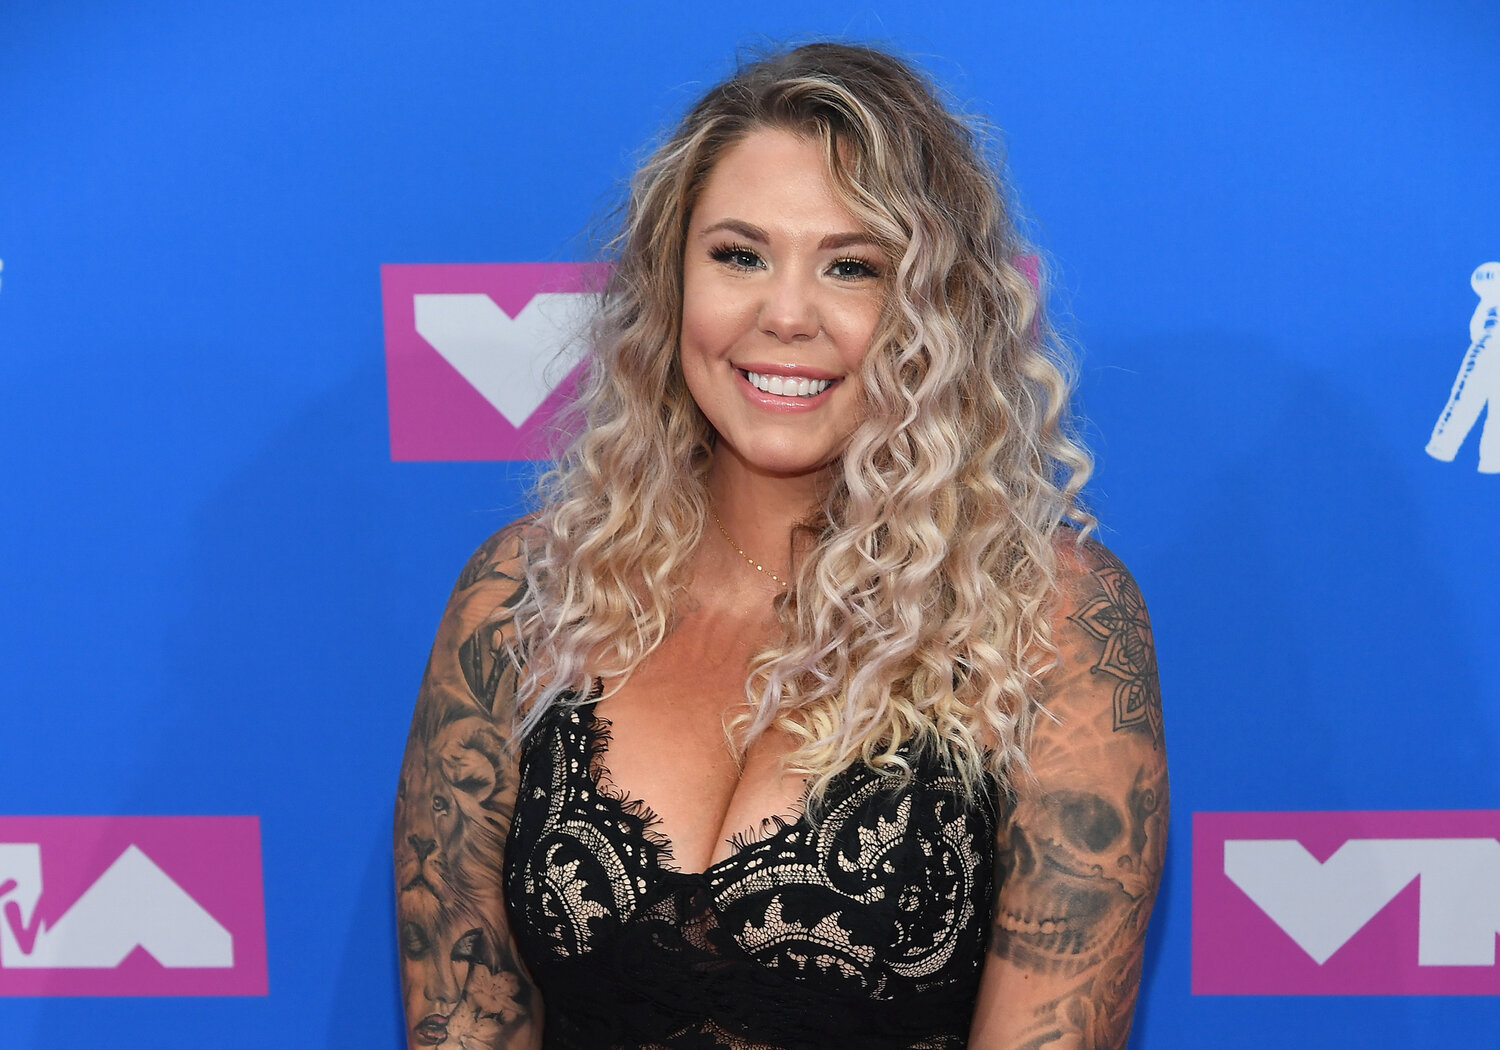 Kailyn Lowry attends the 2018 MTV Video Music Awards